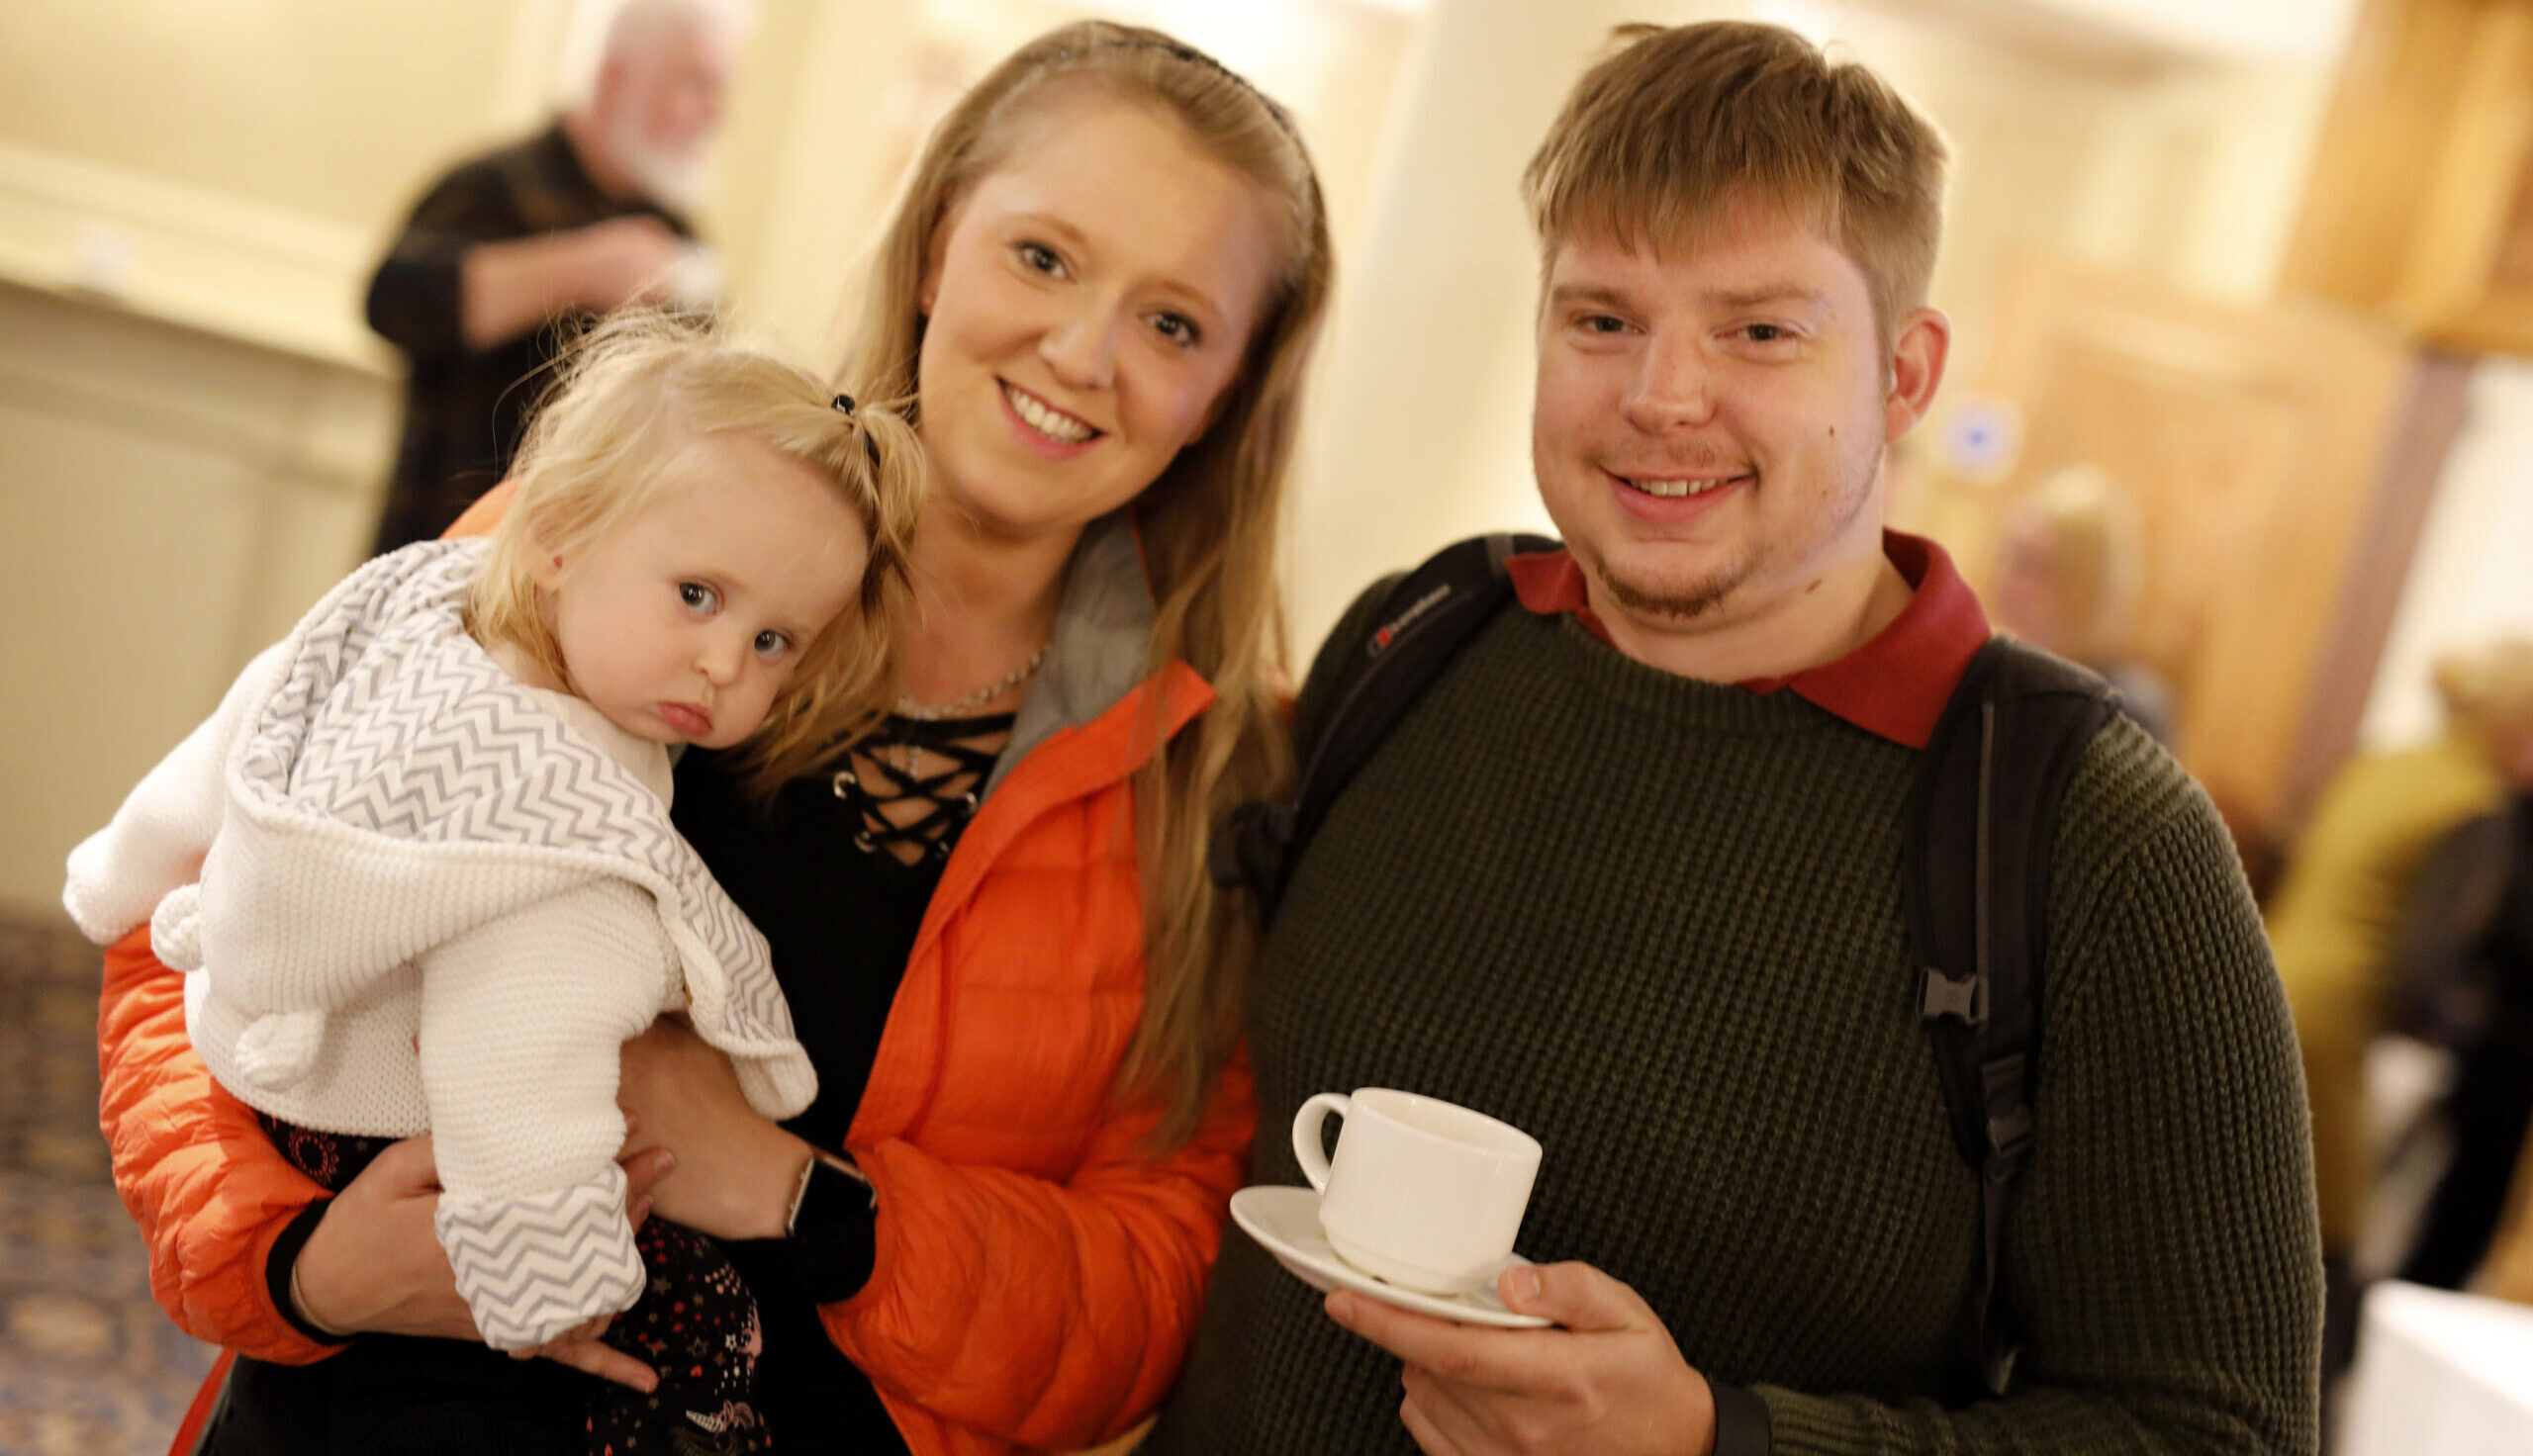 A family smile for the camera. A mother is holding a young child in her arms and the father is holding a cup of tea.